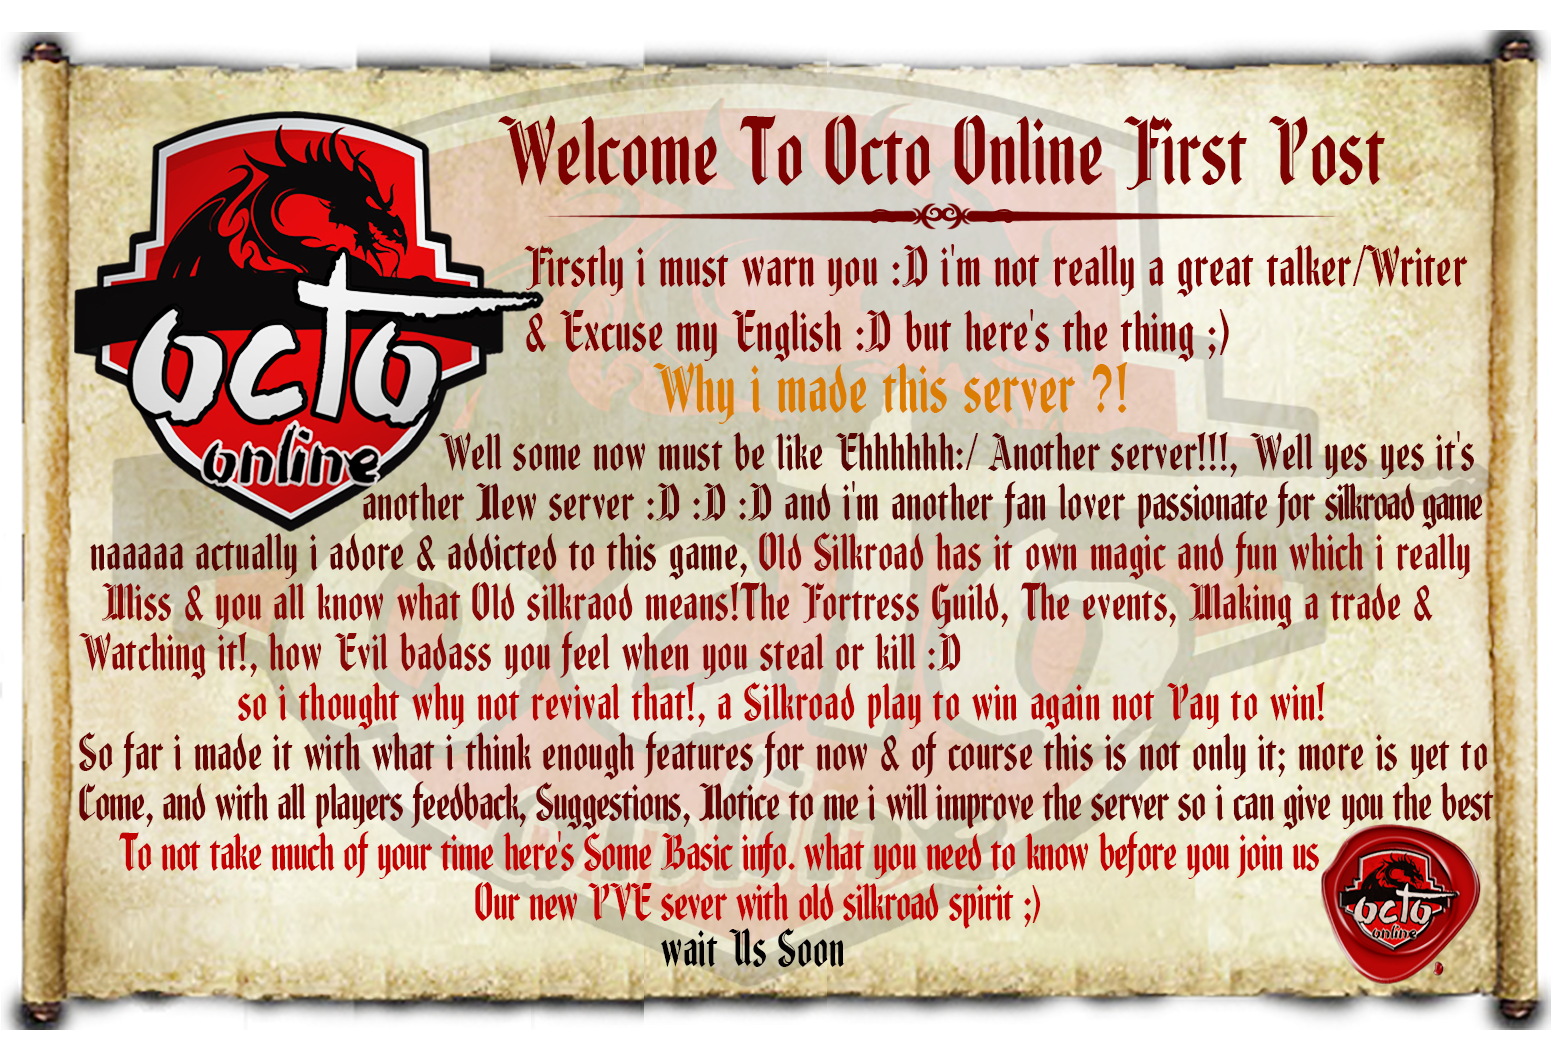  ||Octo Online|| 8D || Silk per hour || 3-Way-System || Completely Free2P ||